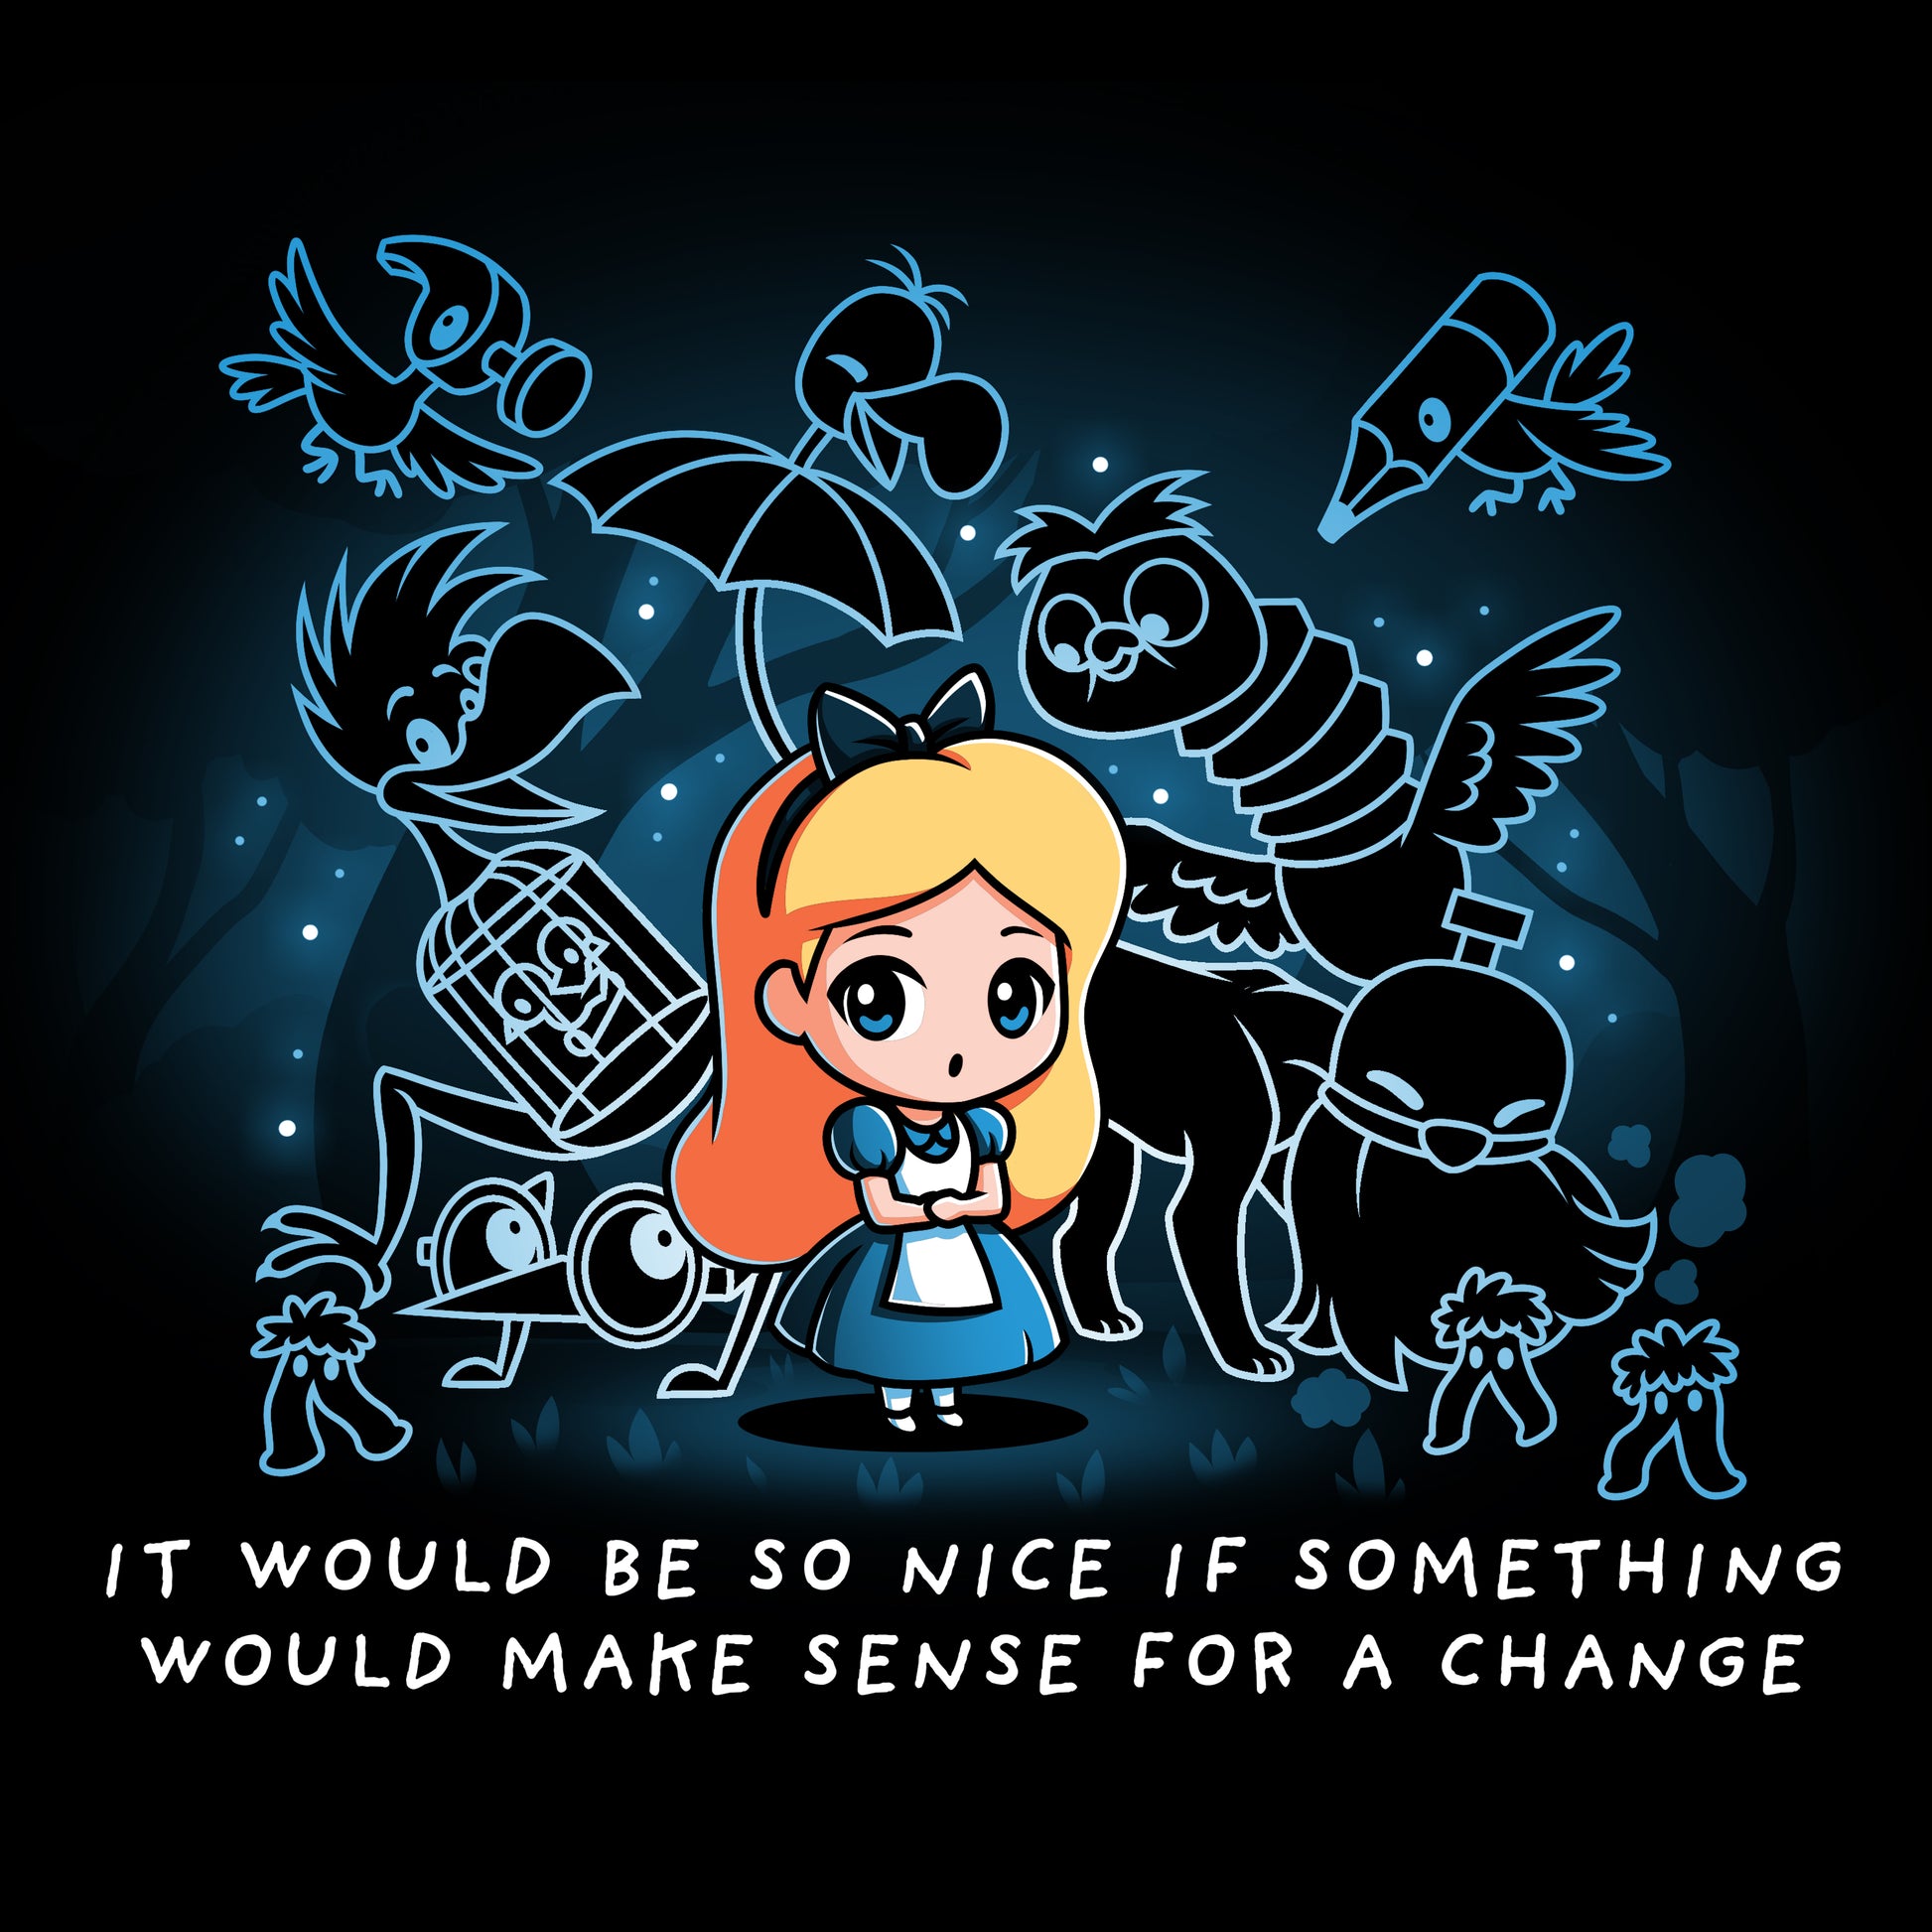 It would be so nice if an officially licensed Disney Nonsensical Wonderland T-shirt would make sense for a change.